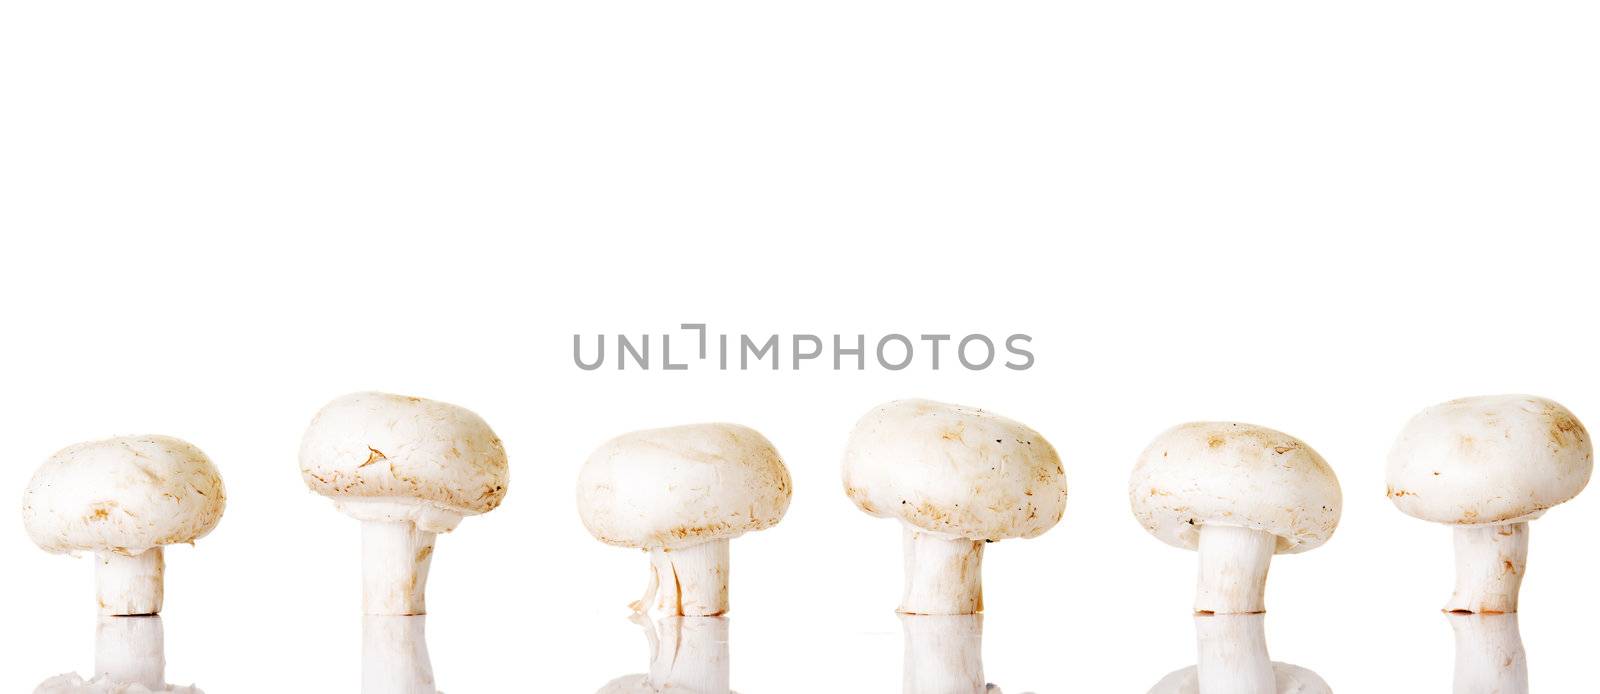 Edible button mushroom, champignon, isolated on white background